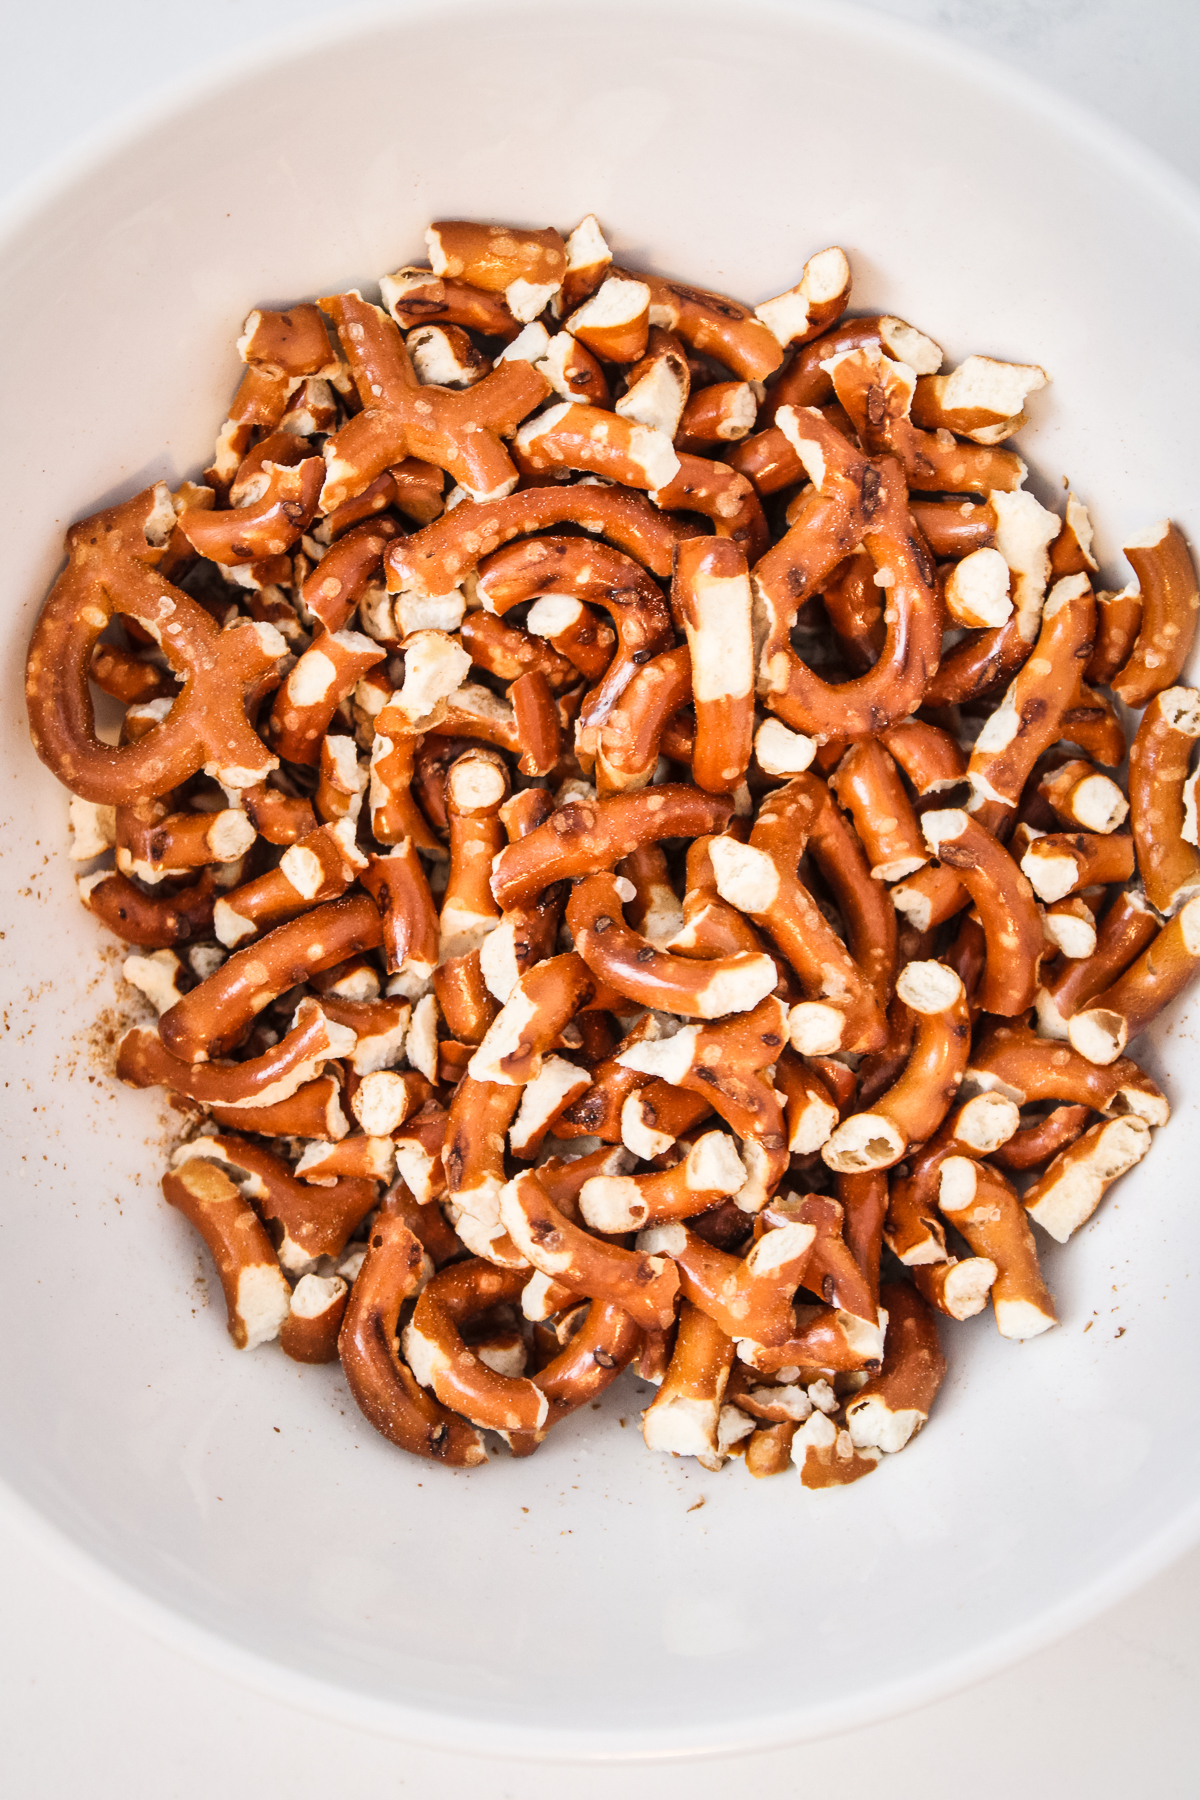 Crushed pretzels in a bowl ready to be added.